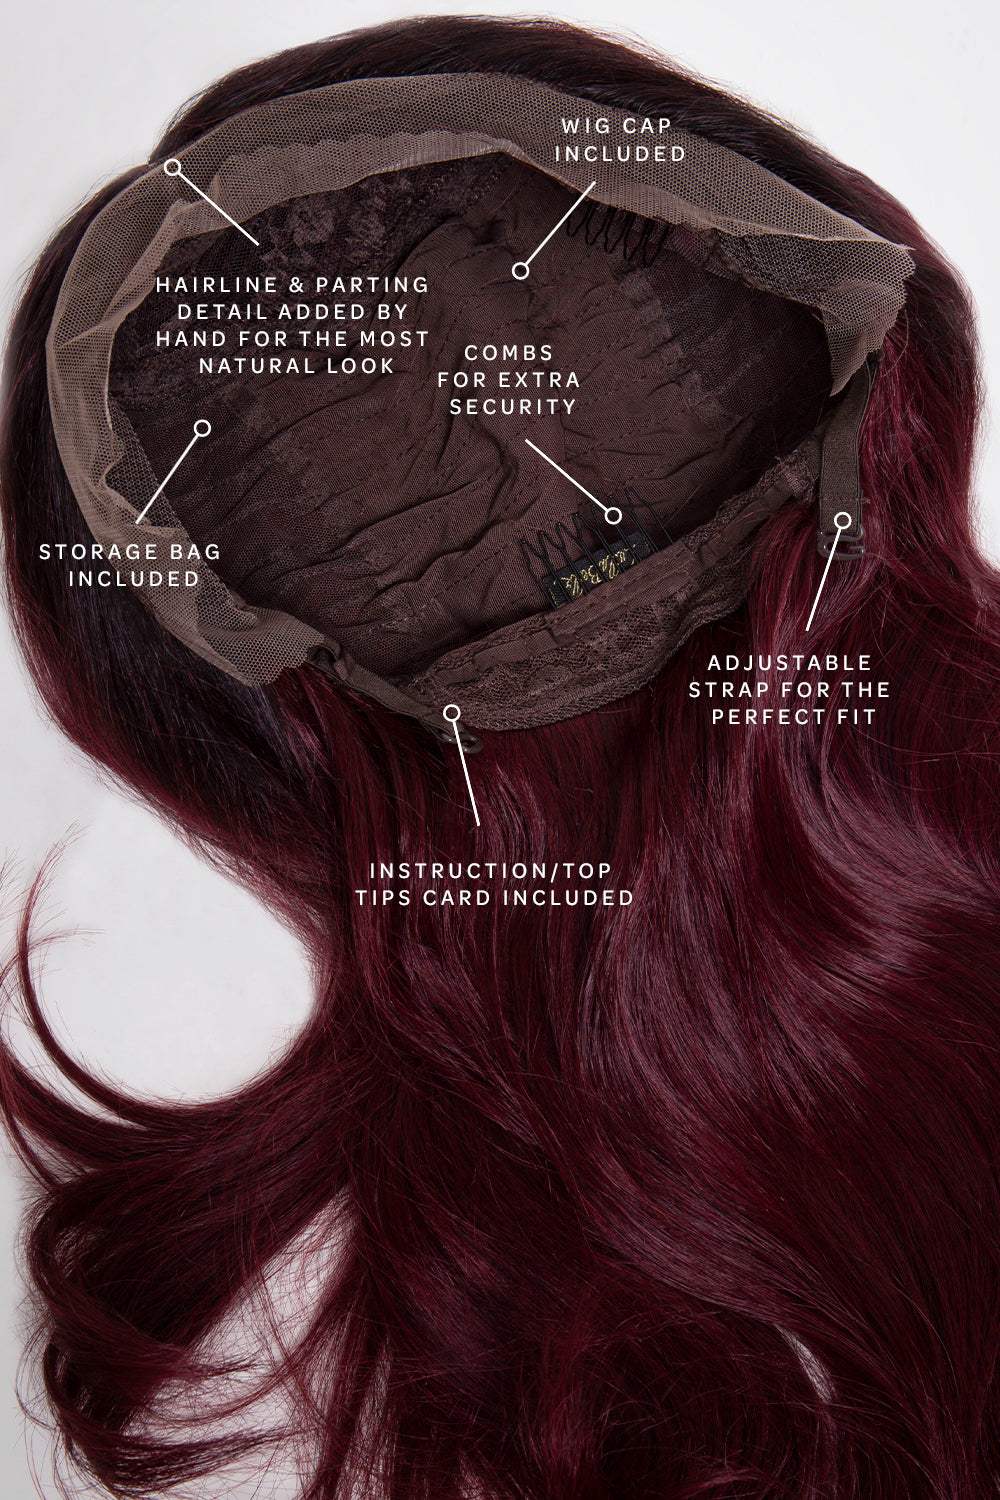 The RiRi - Red Hollywood Waves Lace Front Wig